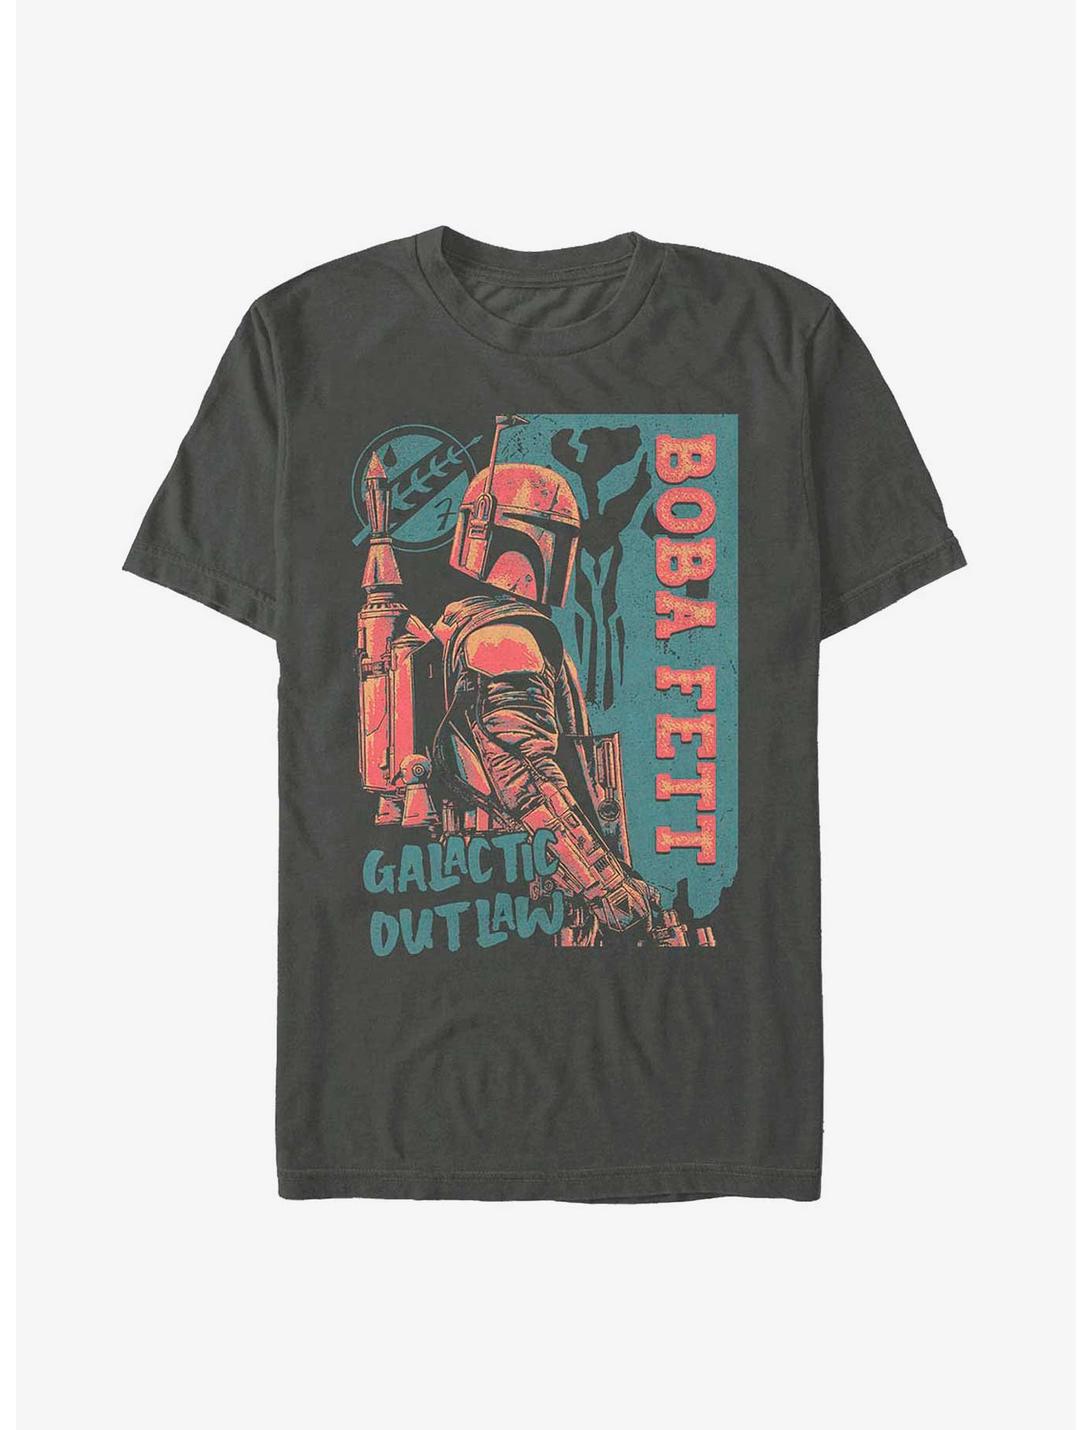 Star Wars: The Book Of Boba Fett Galactic Outlaw Posterized T-Shirt, CHARCOAL, hi-res